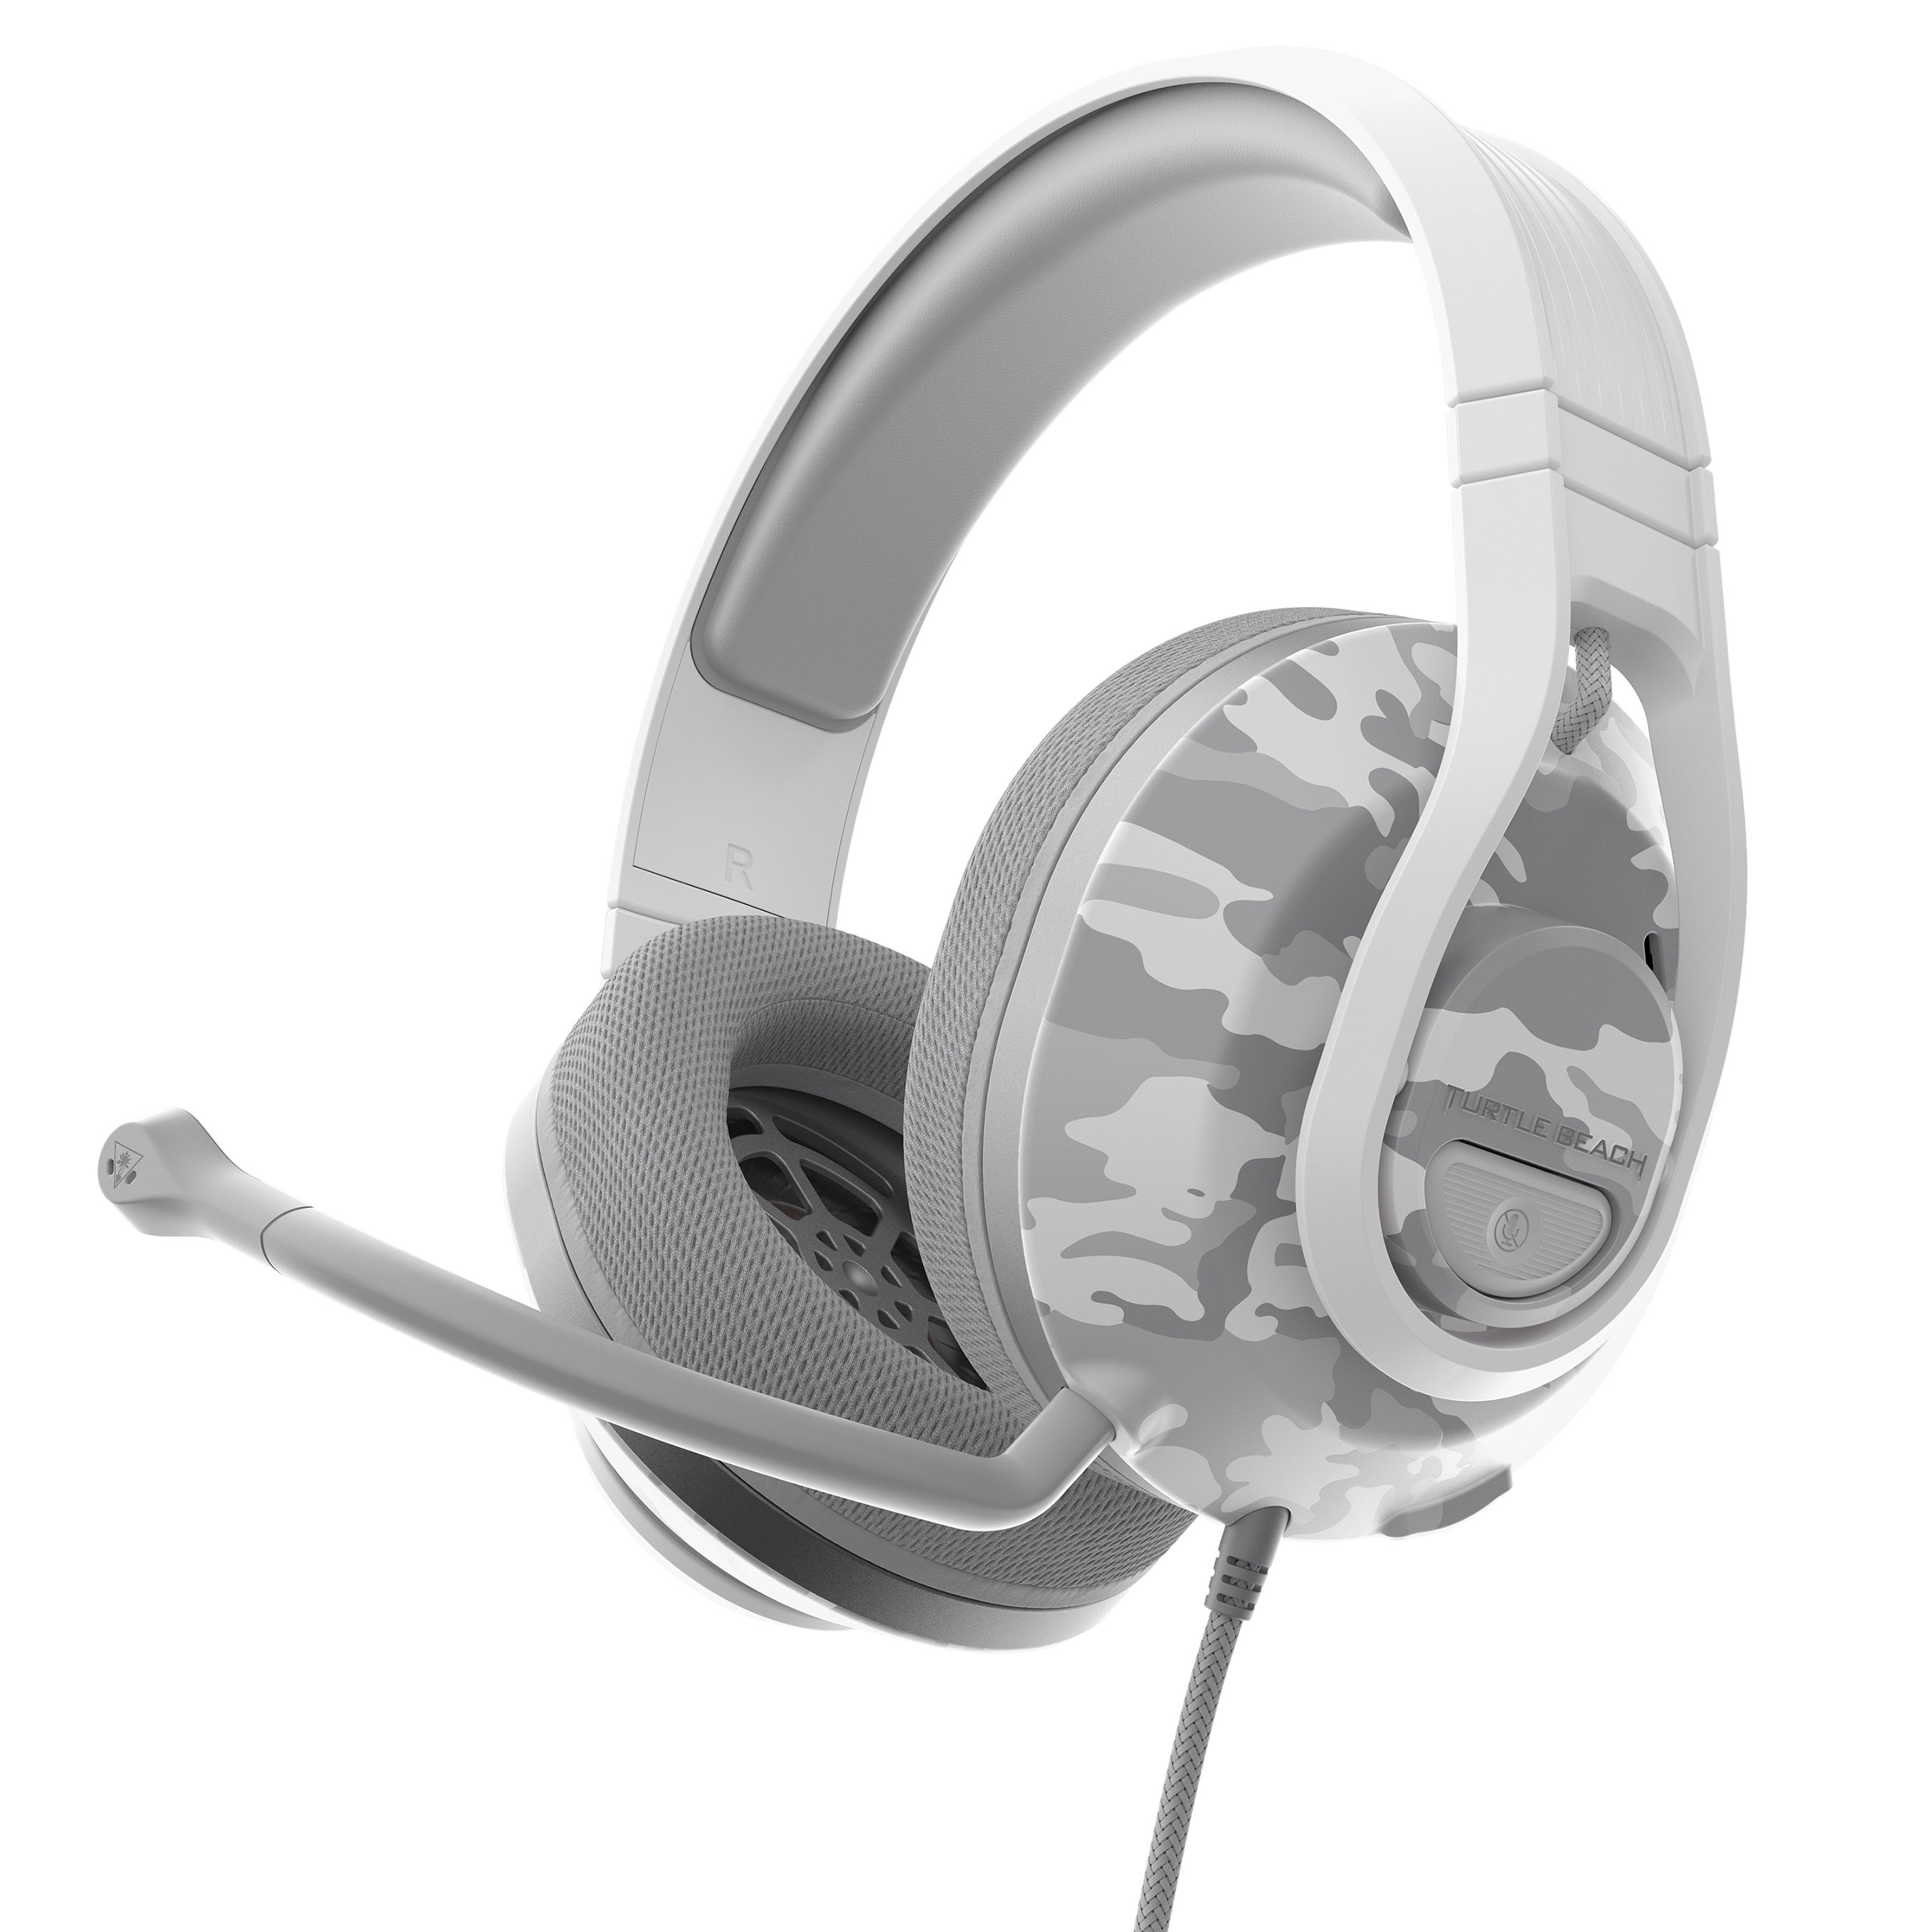 Introducing the Recon 500. Available in Arctic White and Black. Available May 30, 2021. MSRP $79.95.